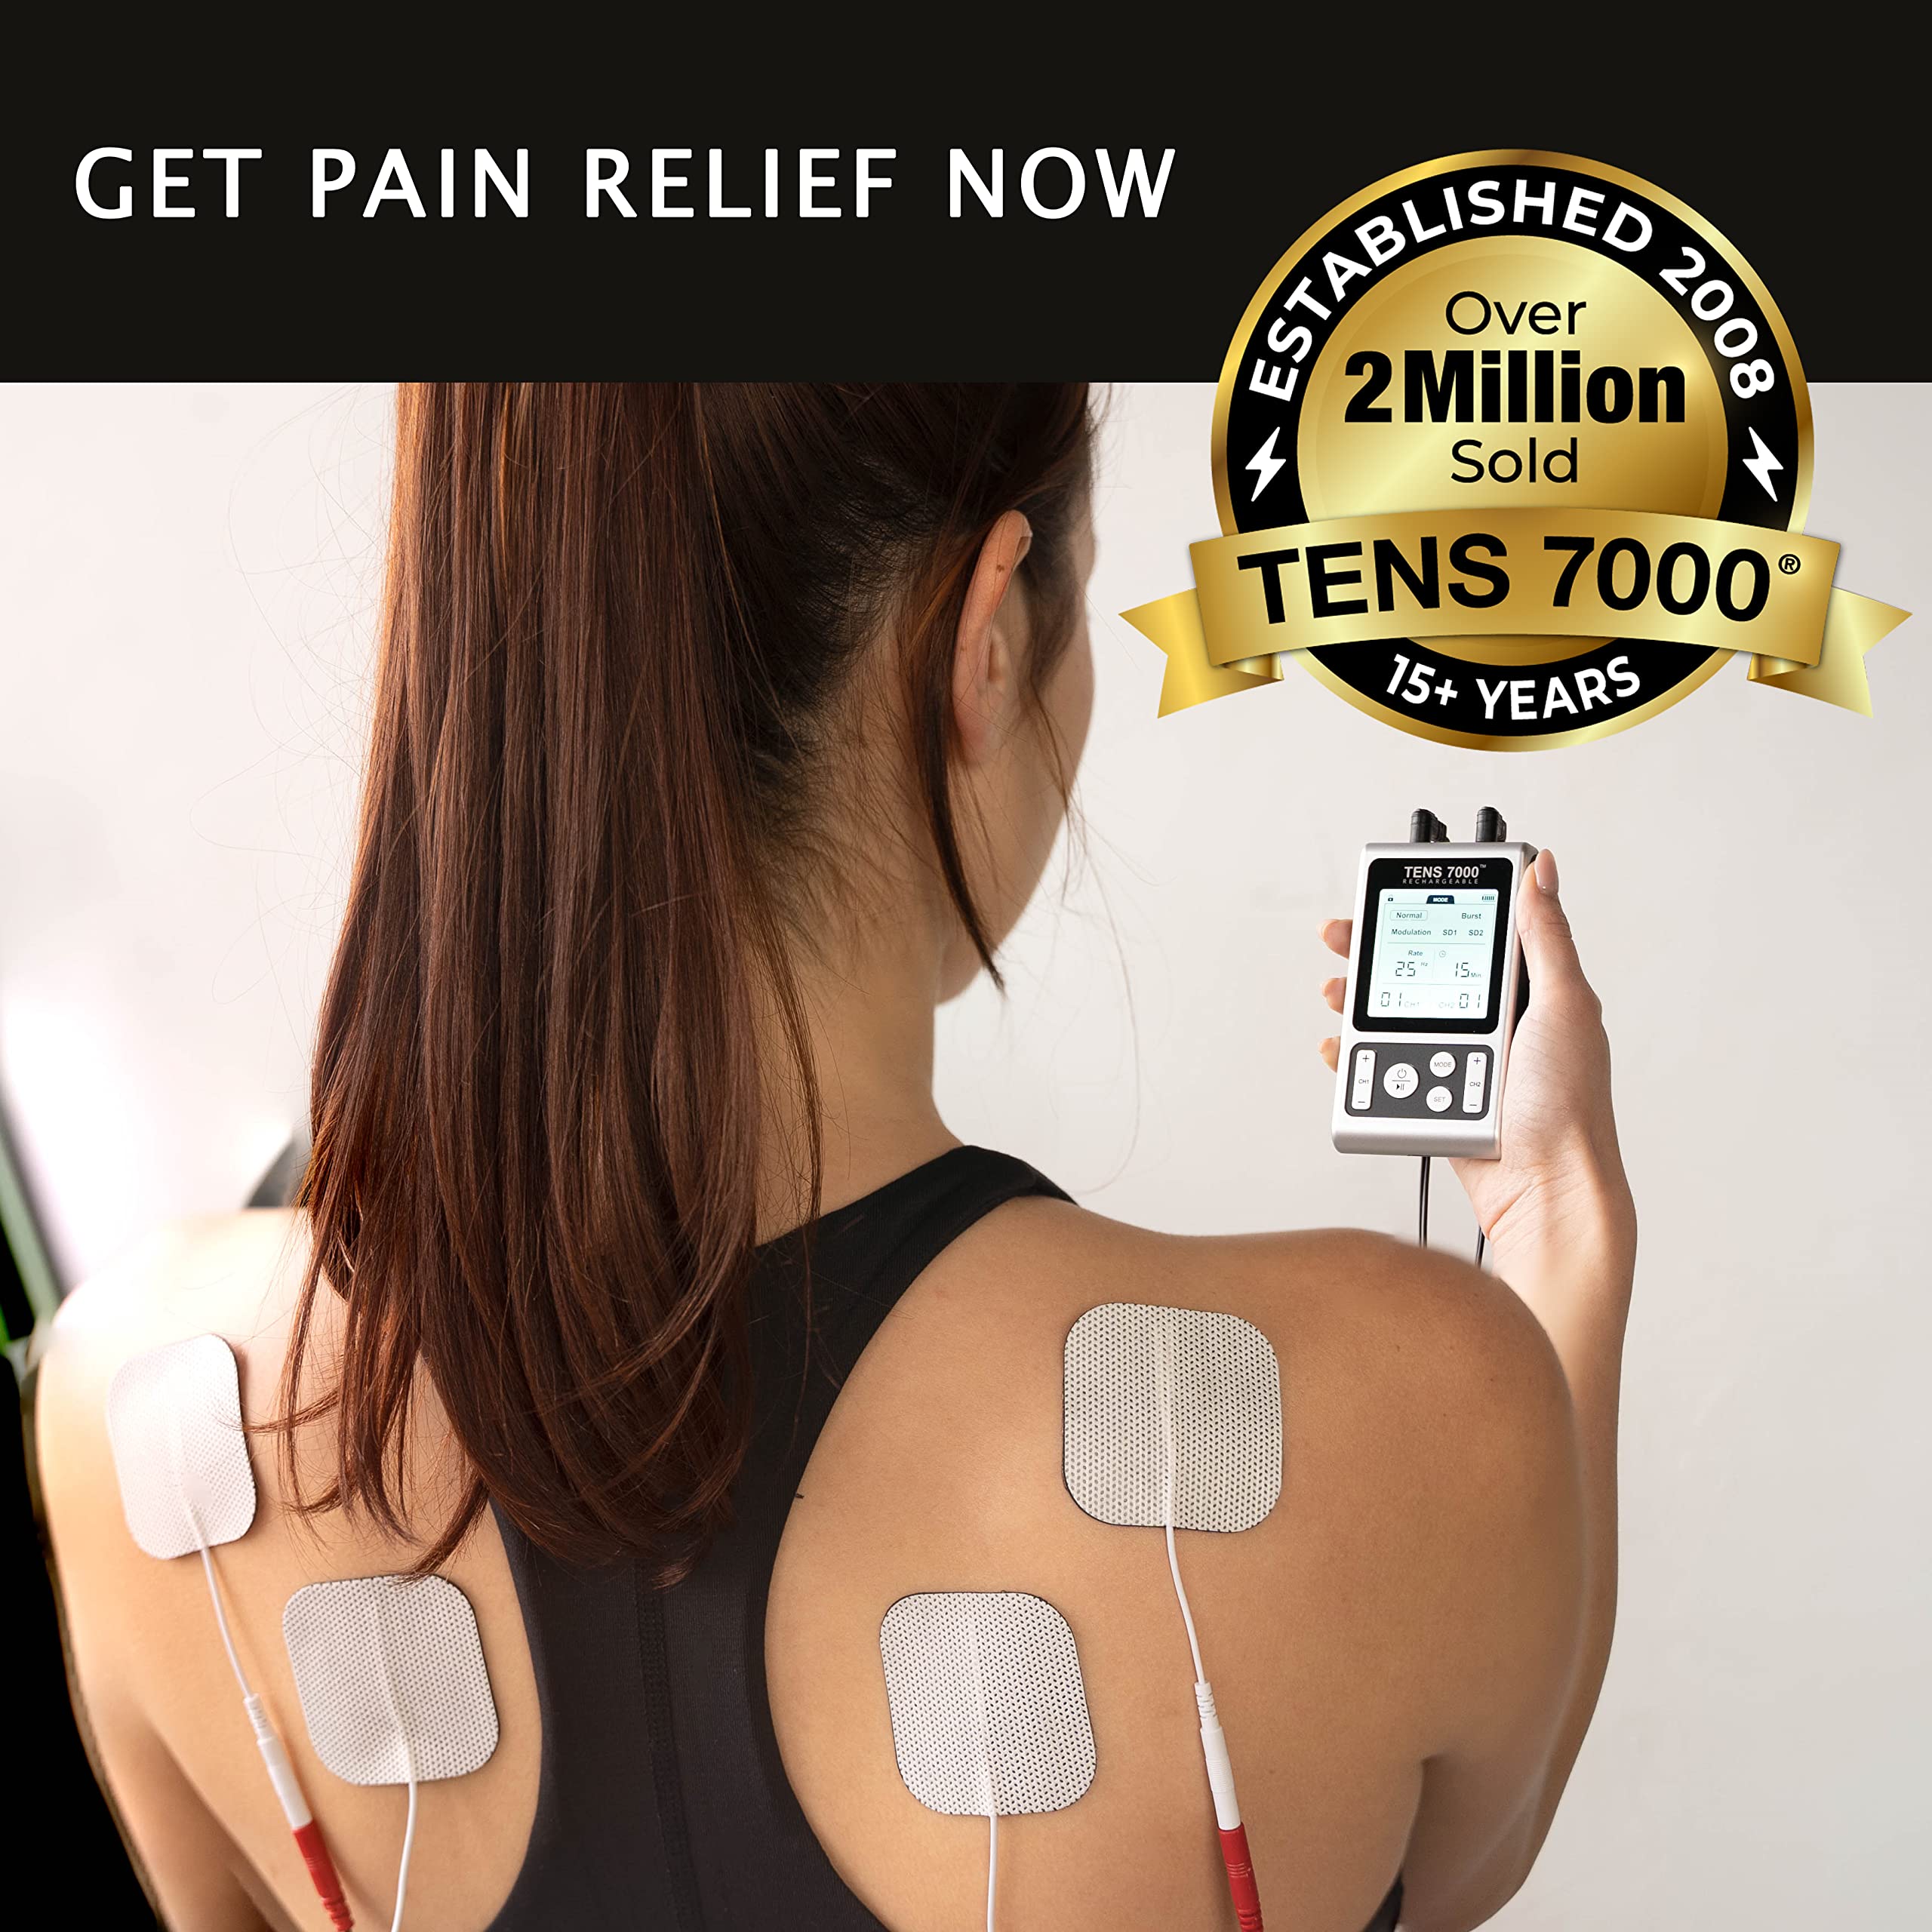 TENS 7000 Rechargeable TENS Unit Muscle Stimulator, 48 Pack Electrodes and Pain Relief Device - Advanced TENS Machine for Effective Back Pain Relief, Nerve Pain Relief, Muscle Pain Relief